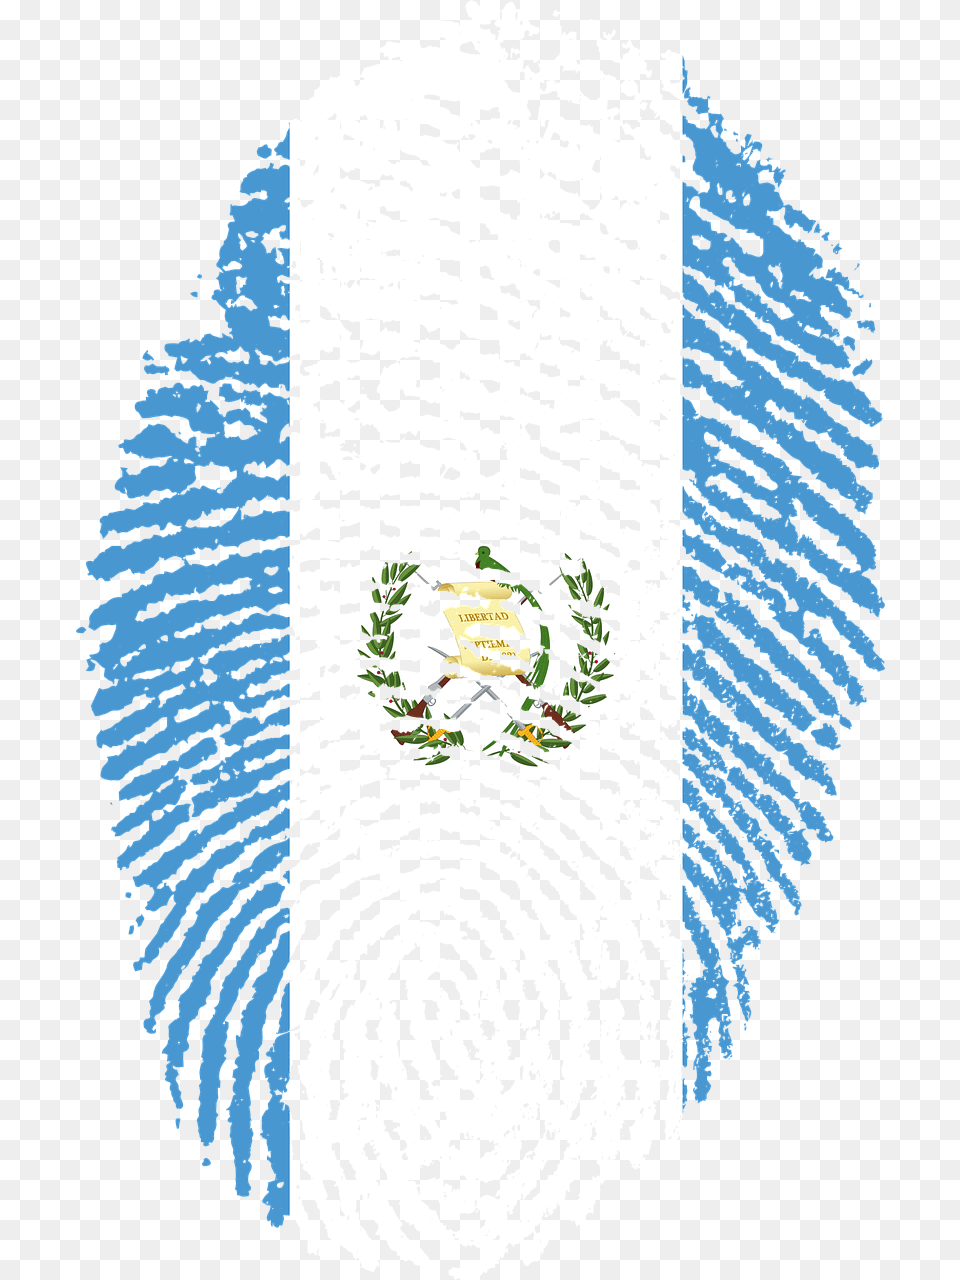 Guatemala Flag, Spiral, Outdoors, Water, Nature Png